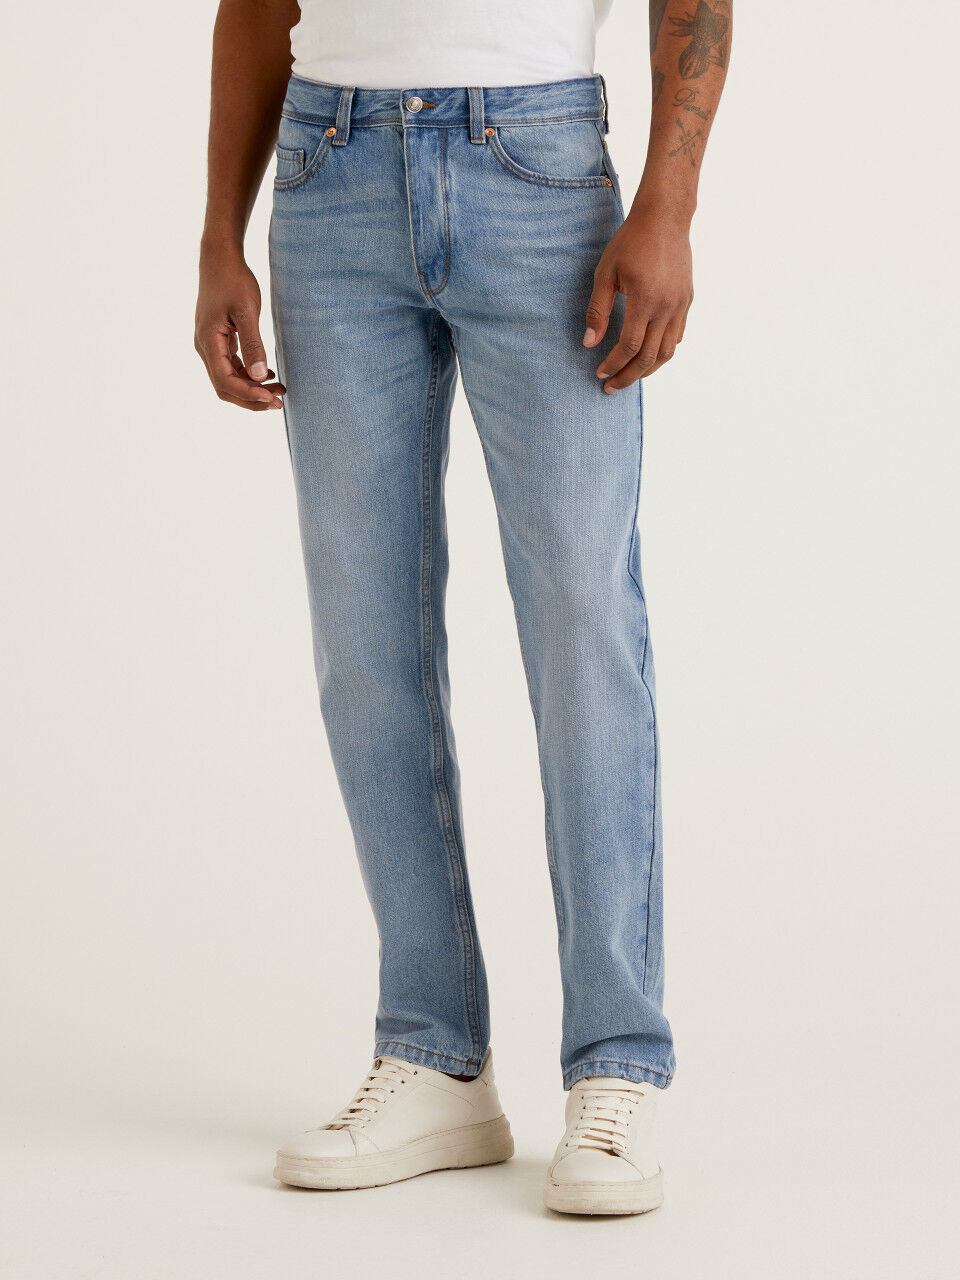 Men's Jeans New Collection 2023 | Benetton